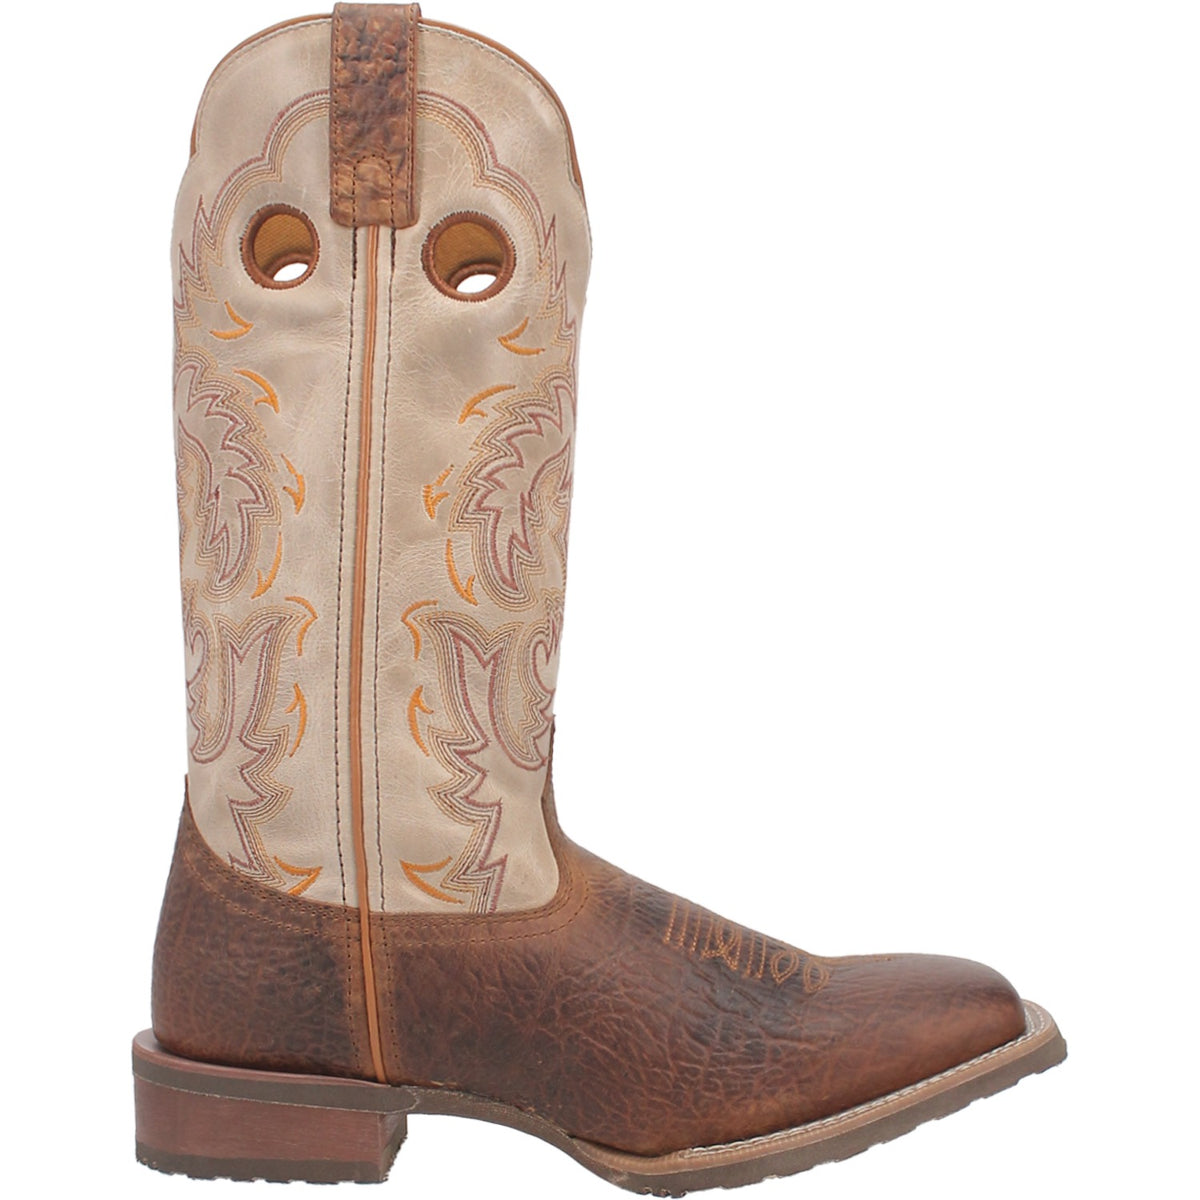 PEETE LEATHER BOOT Cover